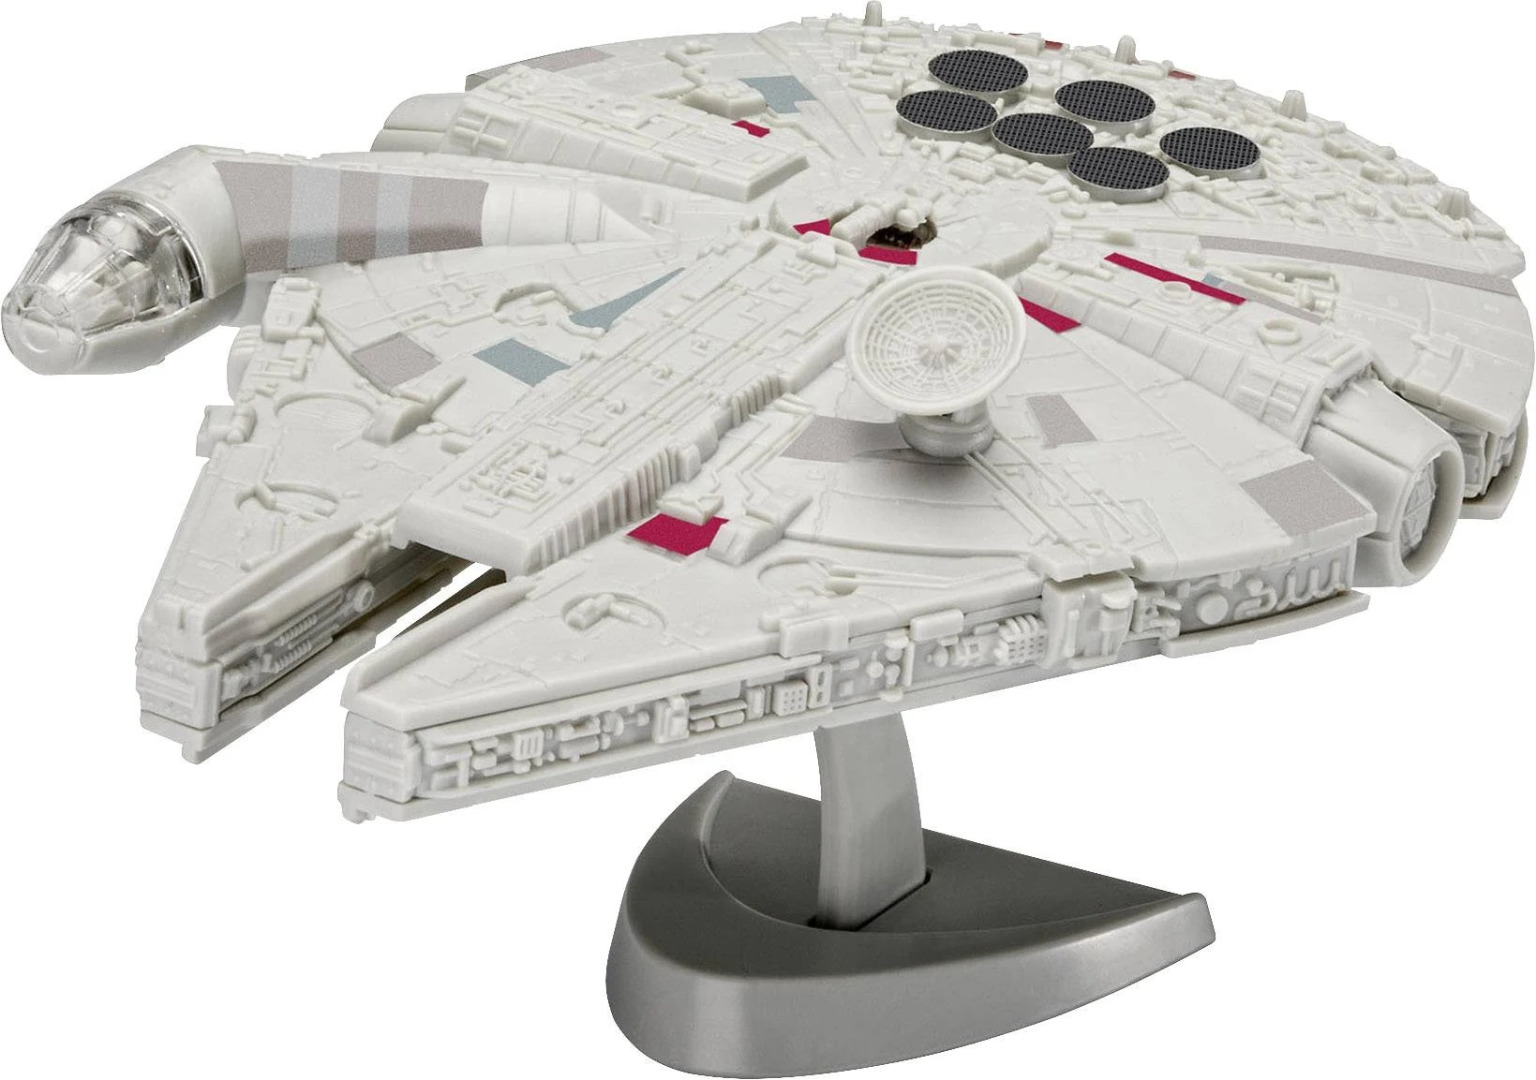 Revell Model Kit Easy-Click System Millenium Falcon Scale 1:241